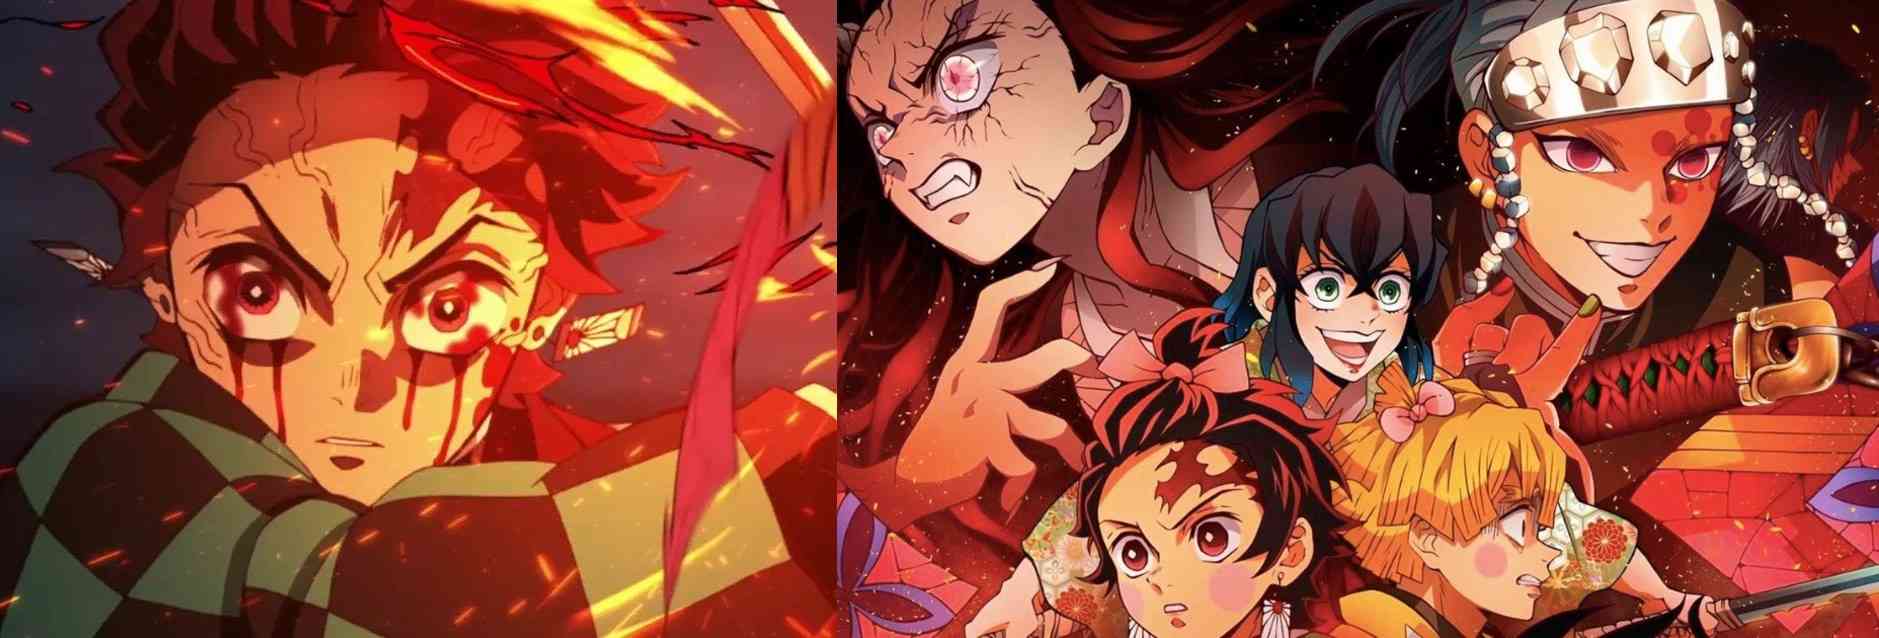 Demon Slayer Season 3 Episode 1 Official Release Date and Time, Where To Watch, Countdown & Preview